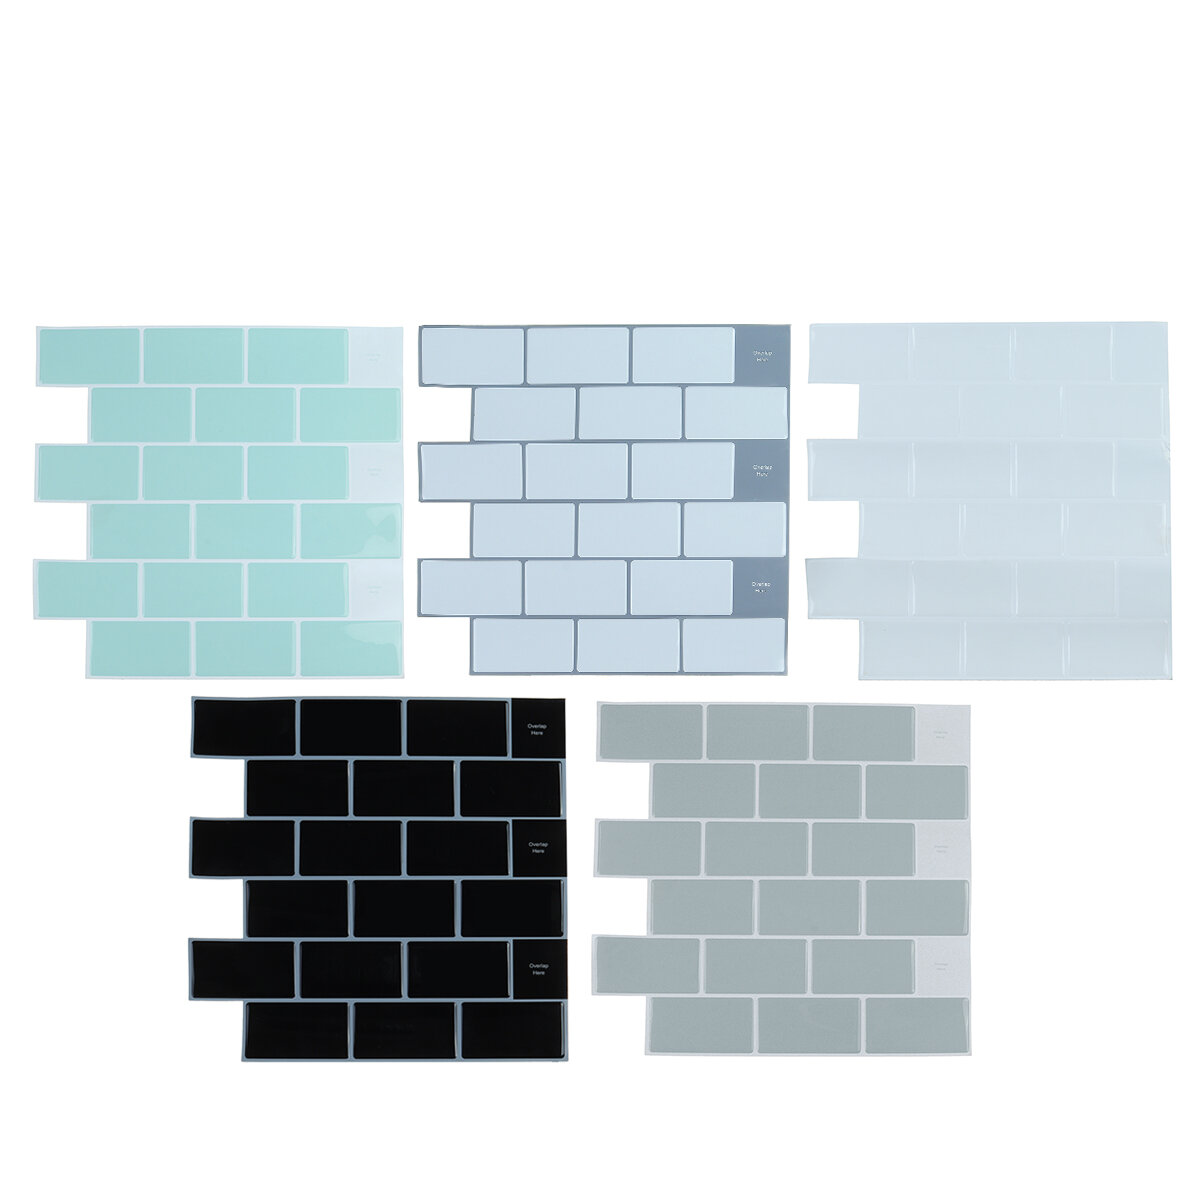 3D Tile Brick Wall Sticker Modern Simple DIY Self-adhesive Waterproof Wall Decal Home Office Kitchen